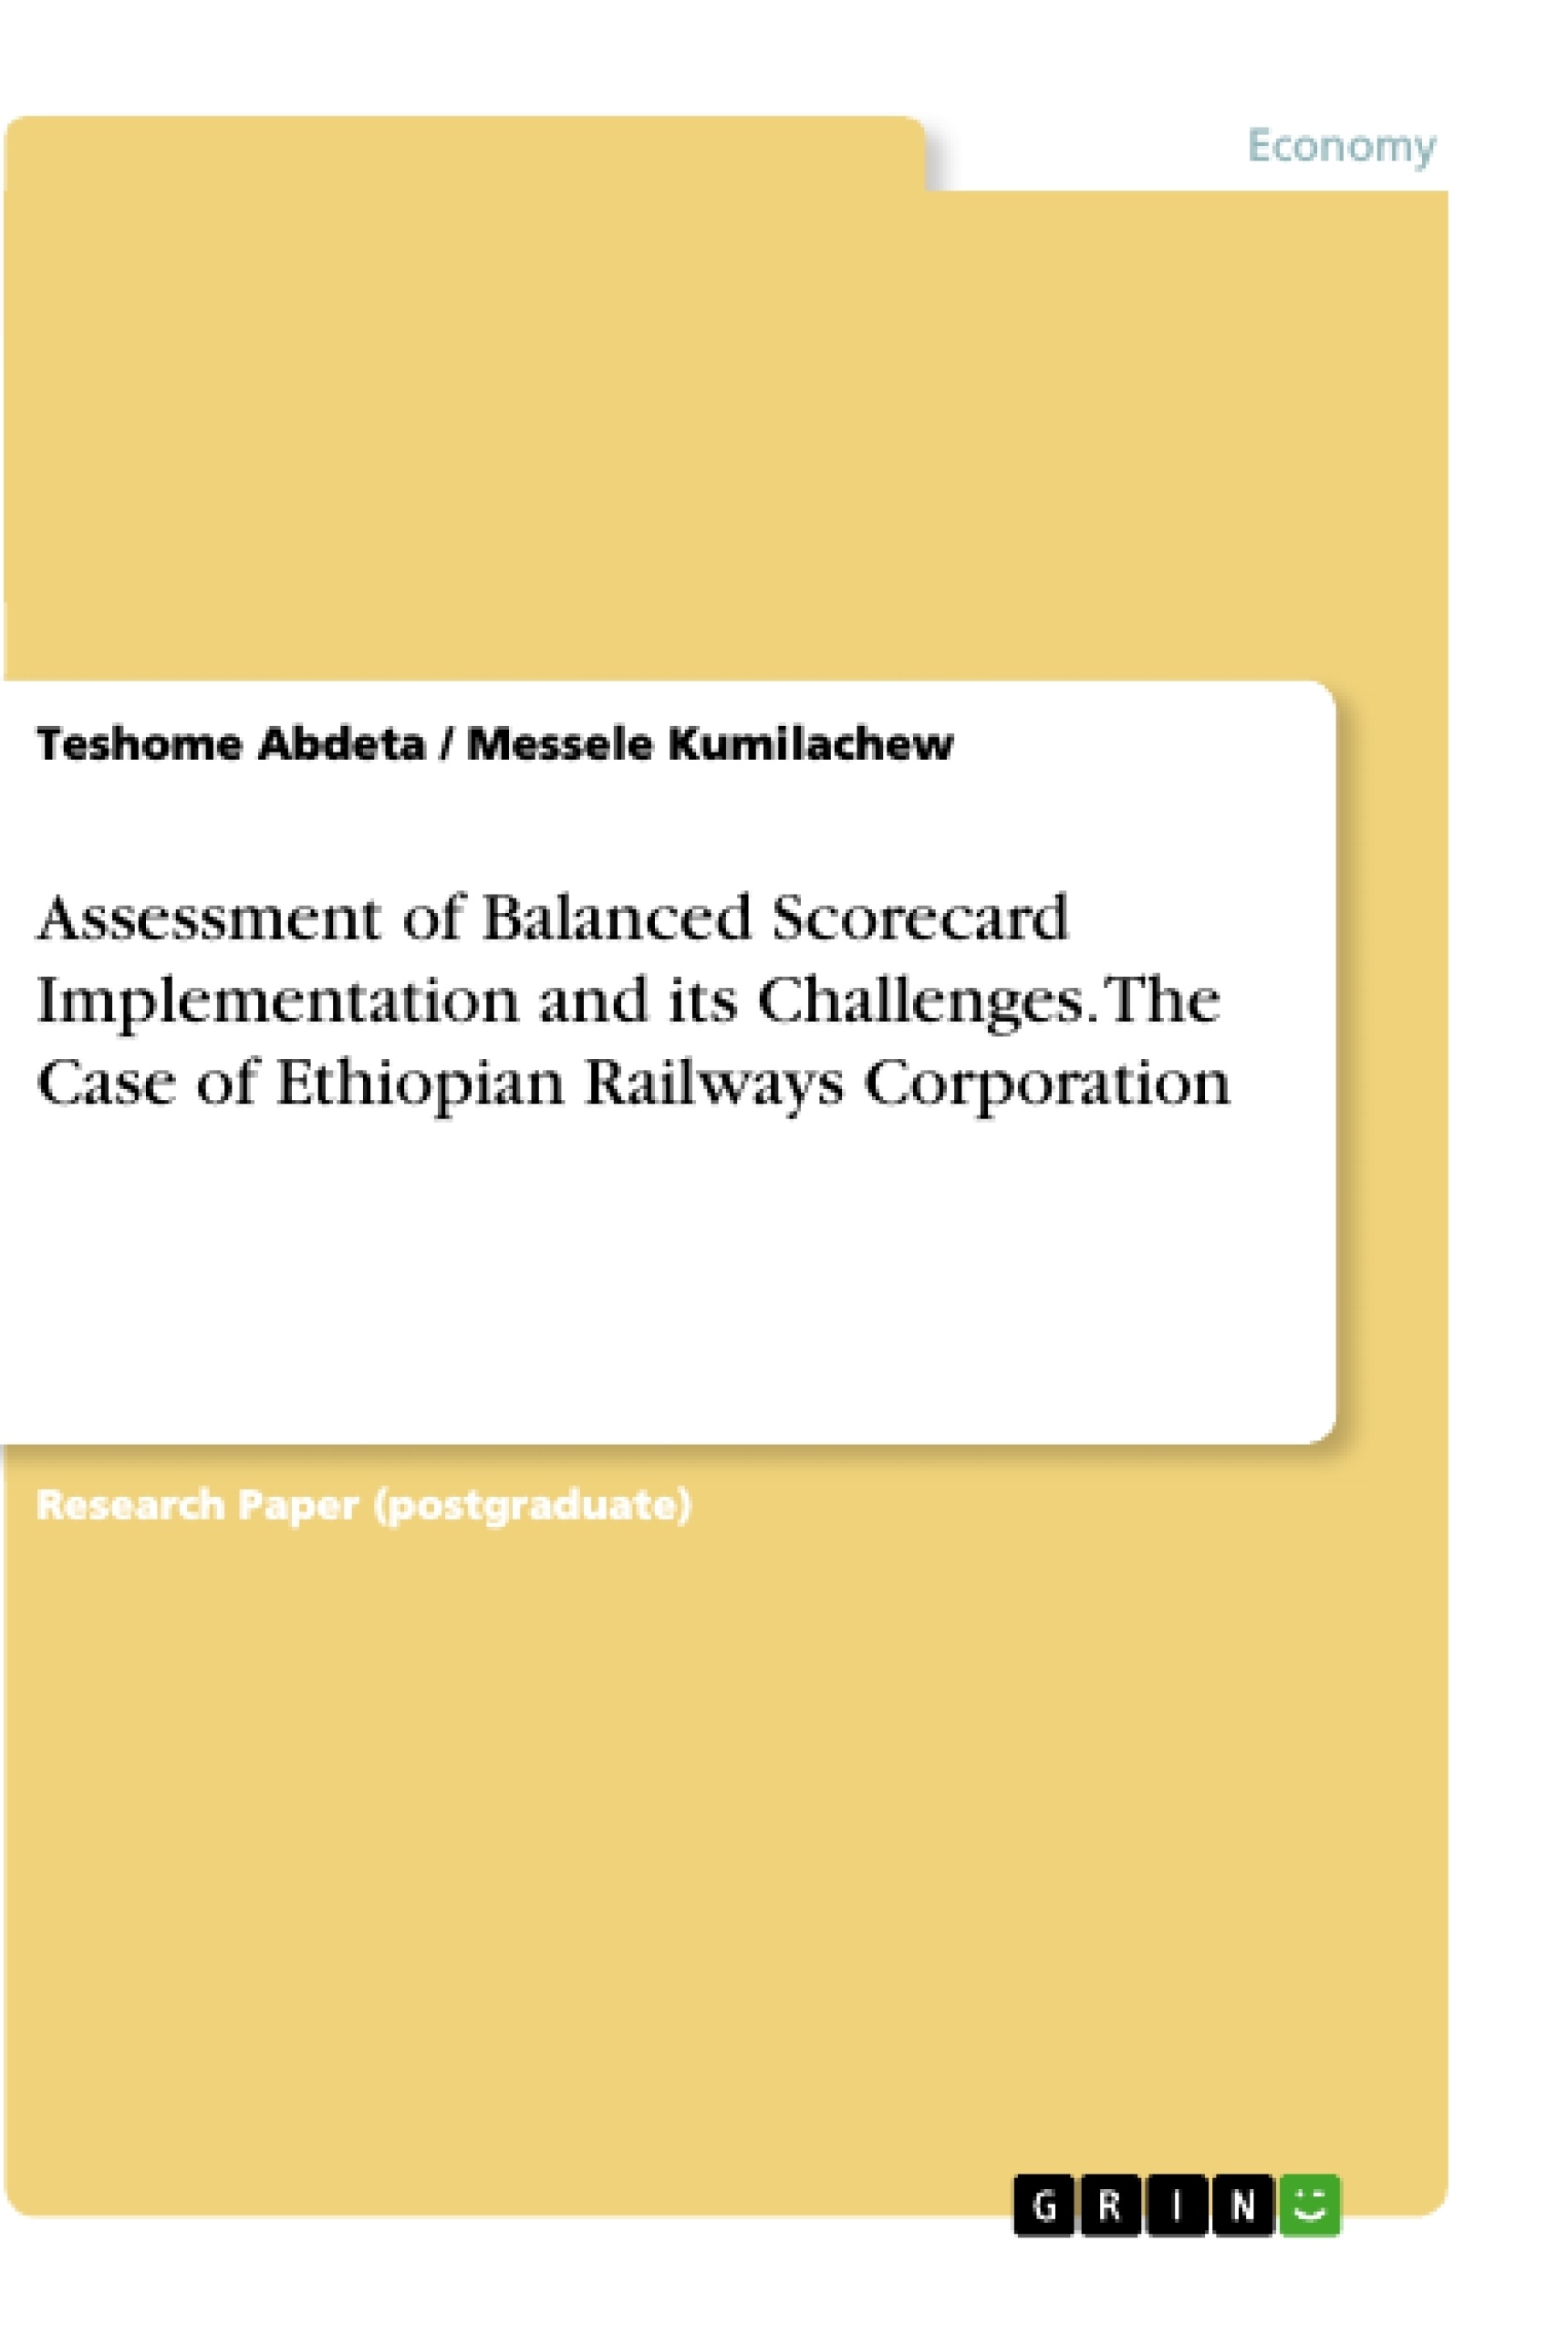 Título: Assessment of Balanced Scorecard Implementation and its Challenges. The Case of Ethiopian Railways Corporation